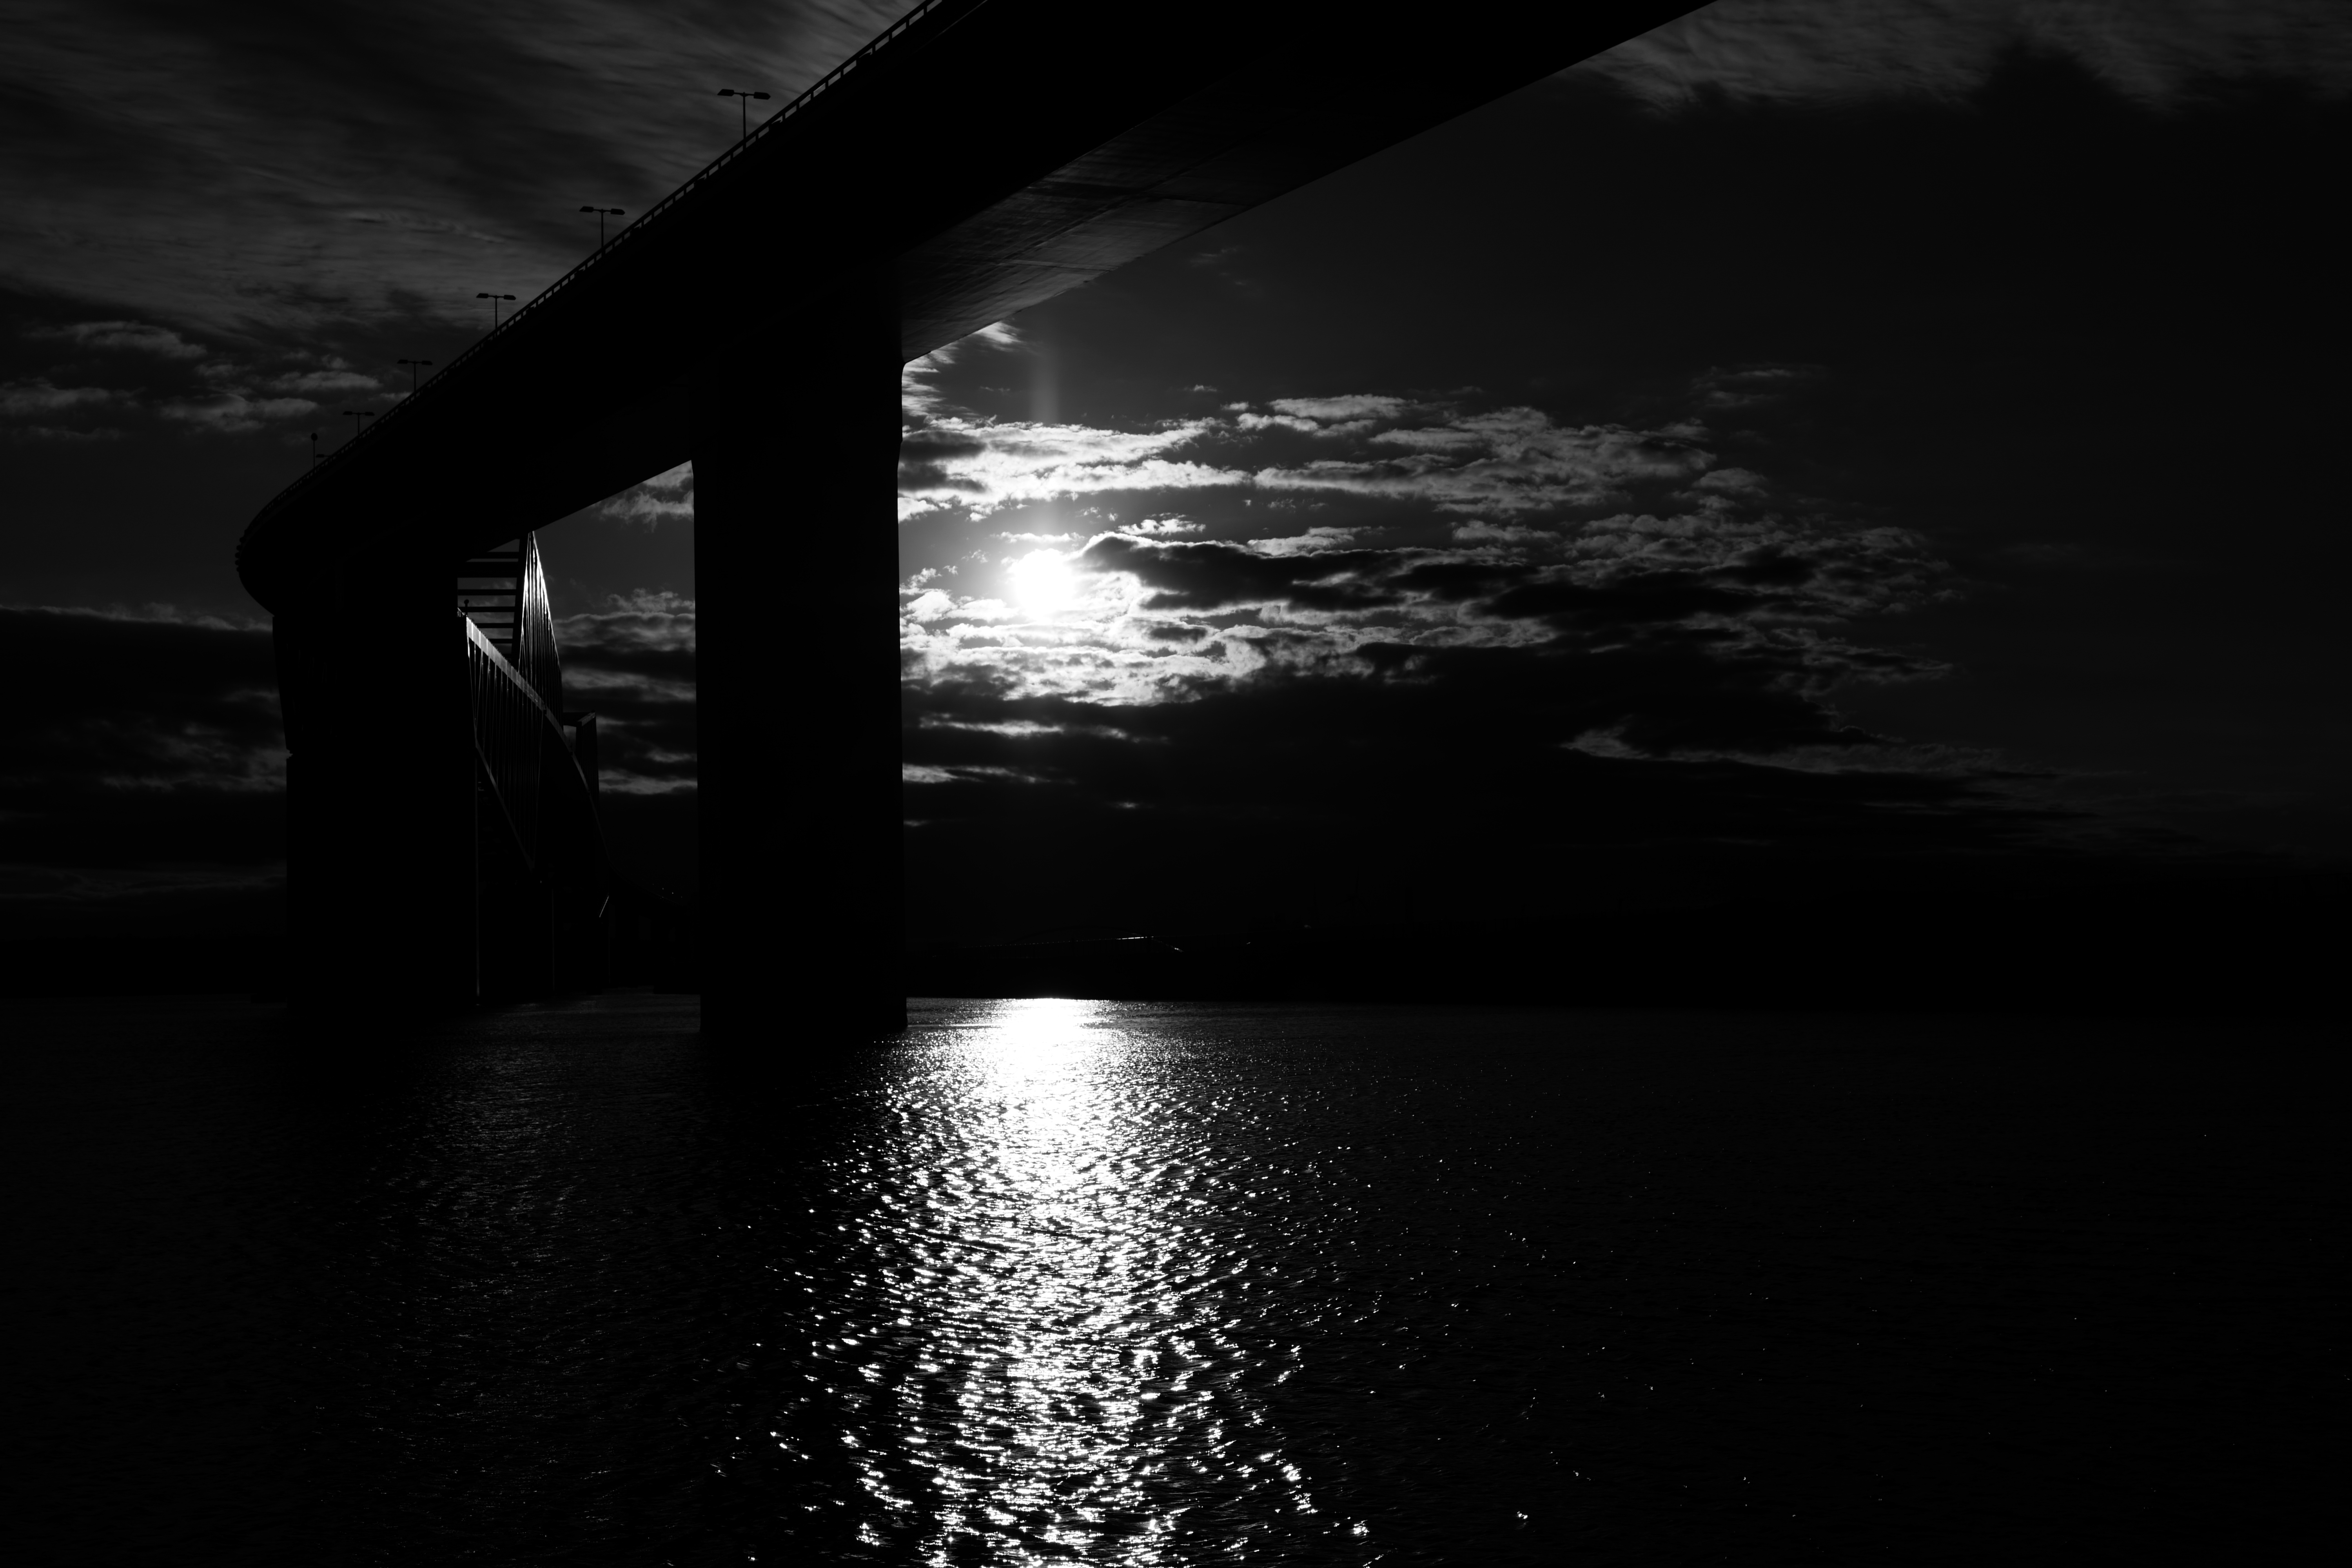 114294 download wallpaper dark, sun, rivers, black, reflection, bridge, bw, chb screensavers and pictures for free